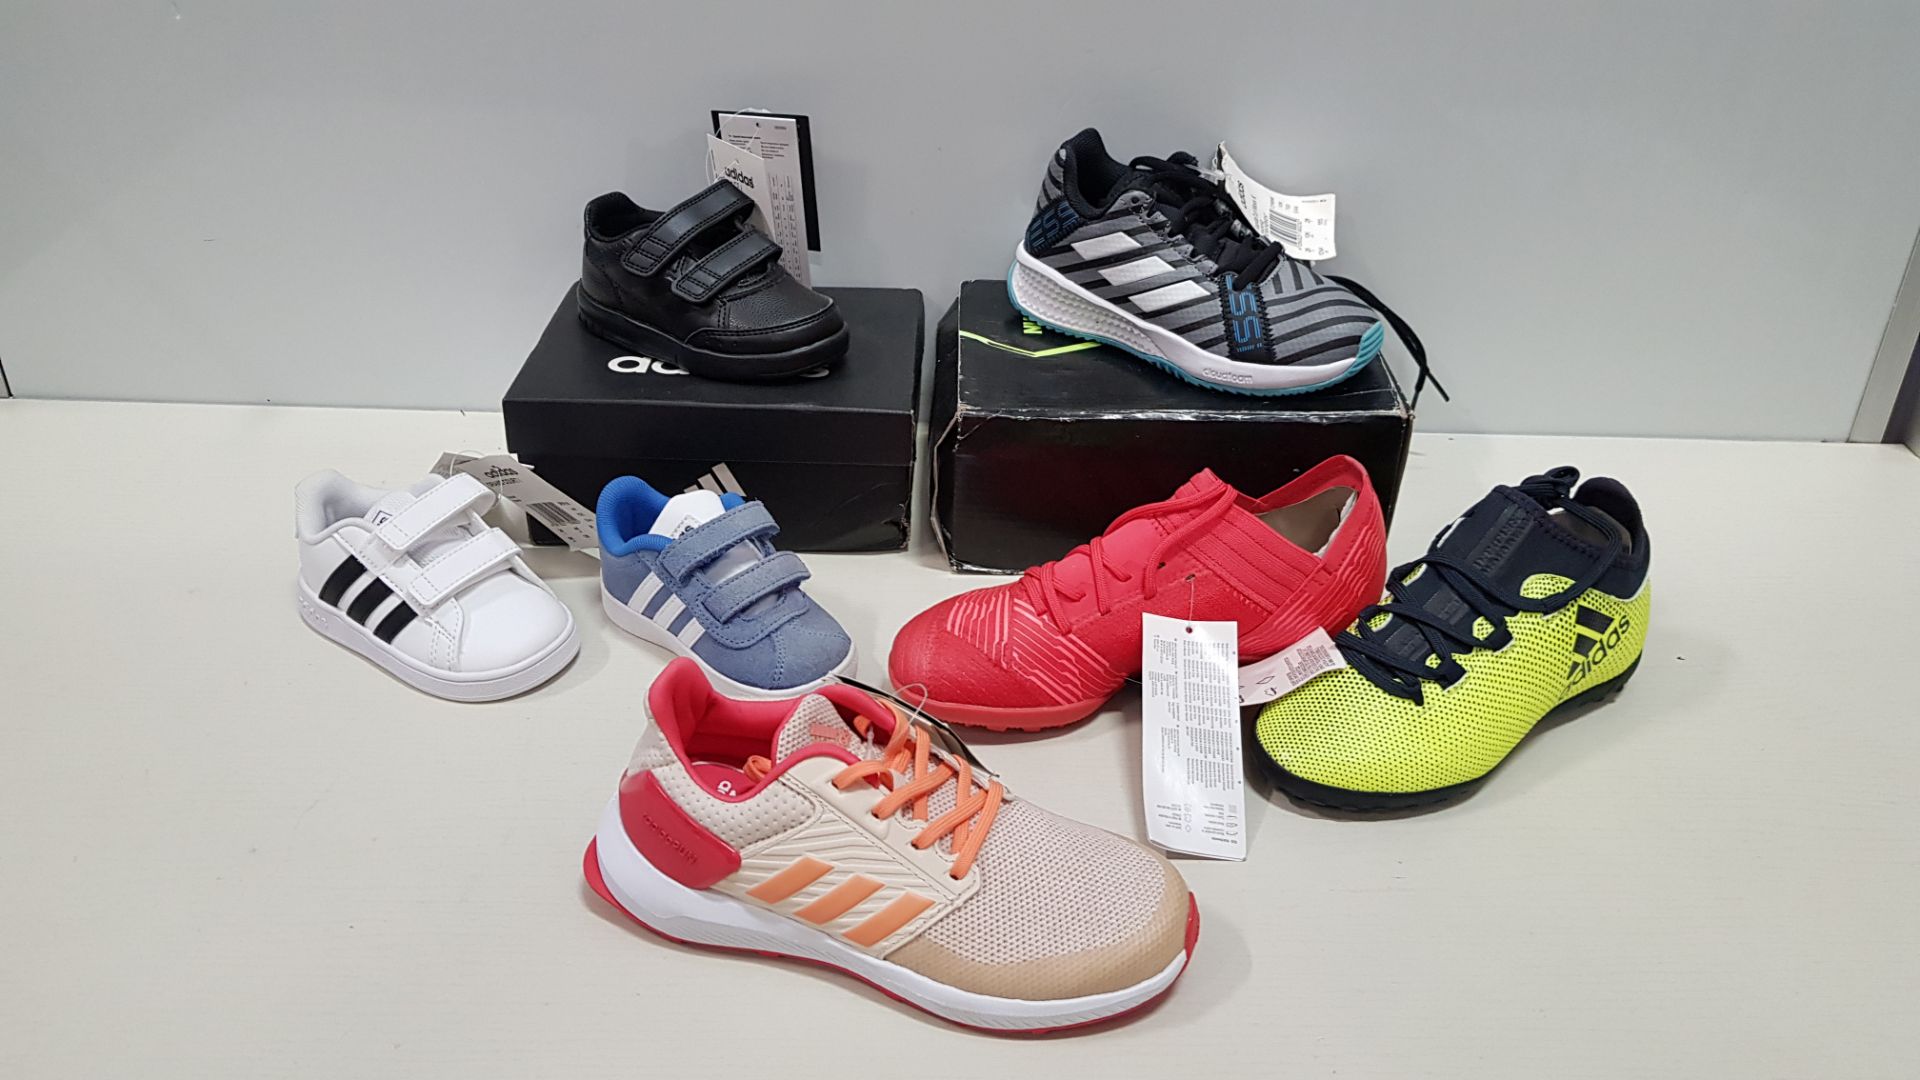 20 X BRAND NEW MIXED SPORTS FOOTWEAR LOT CONTAINING ADIDAS MESS TRAINERS, ADIDAS TANGO TRAINERS,